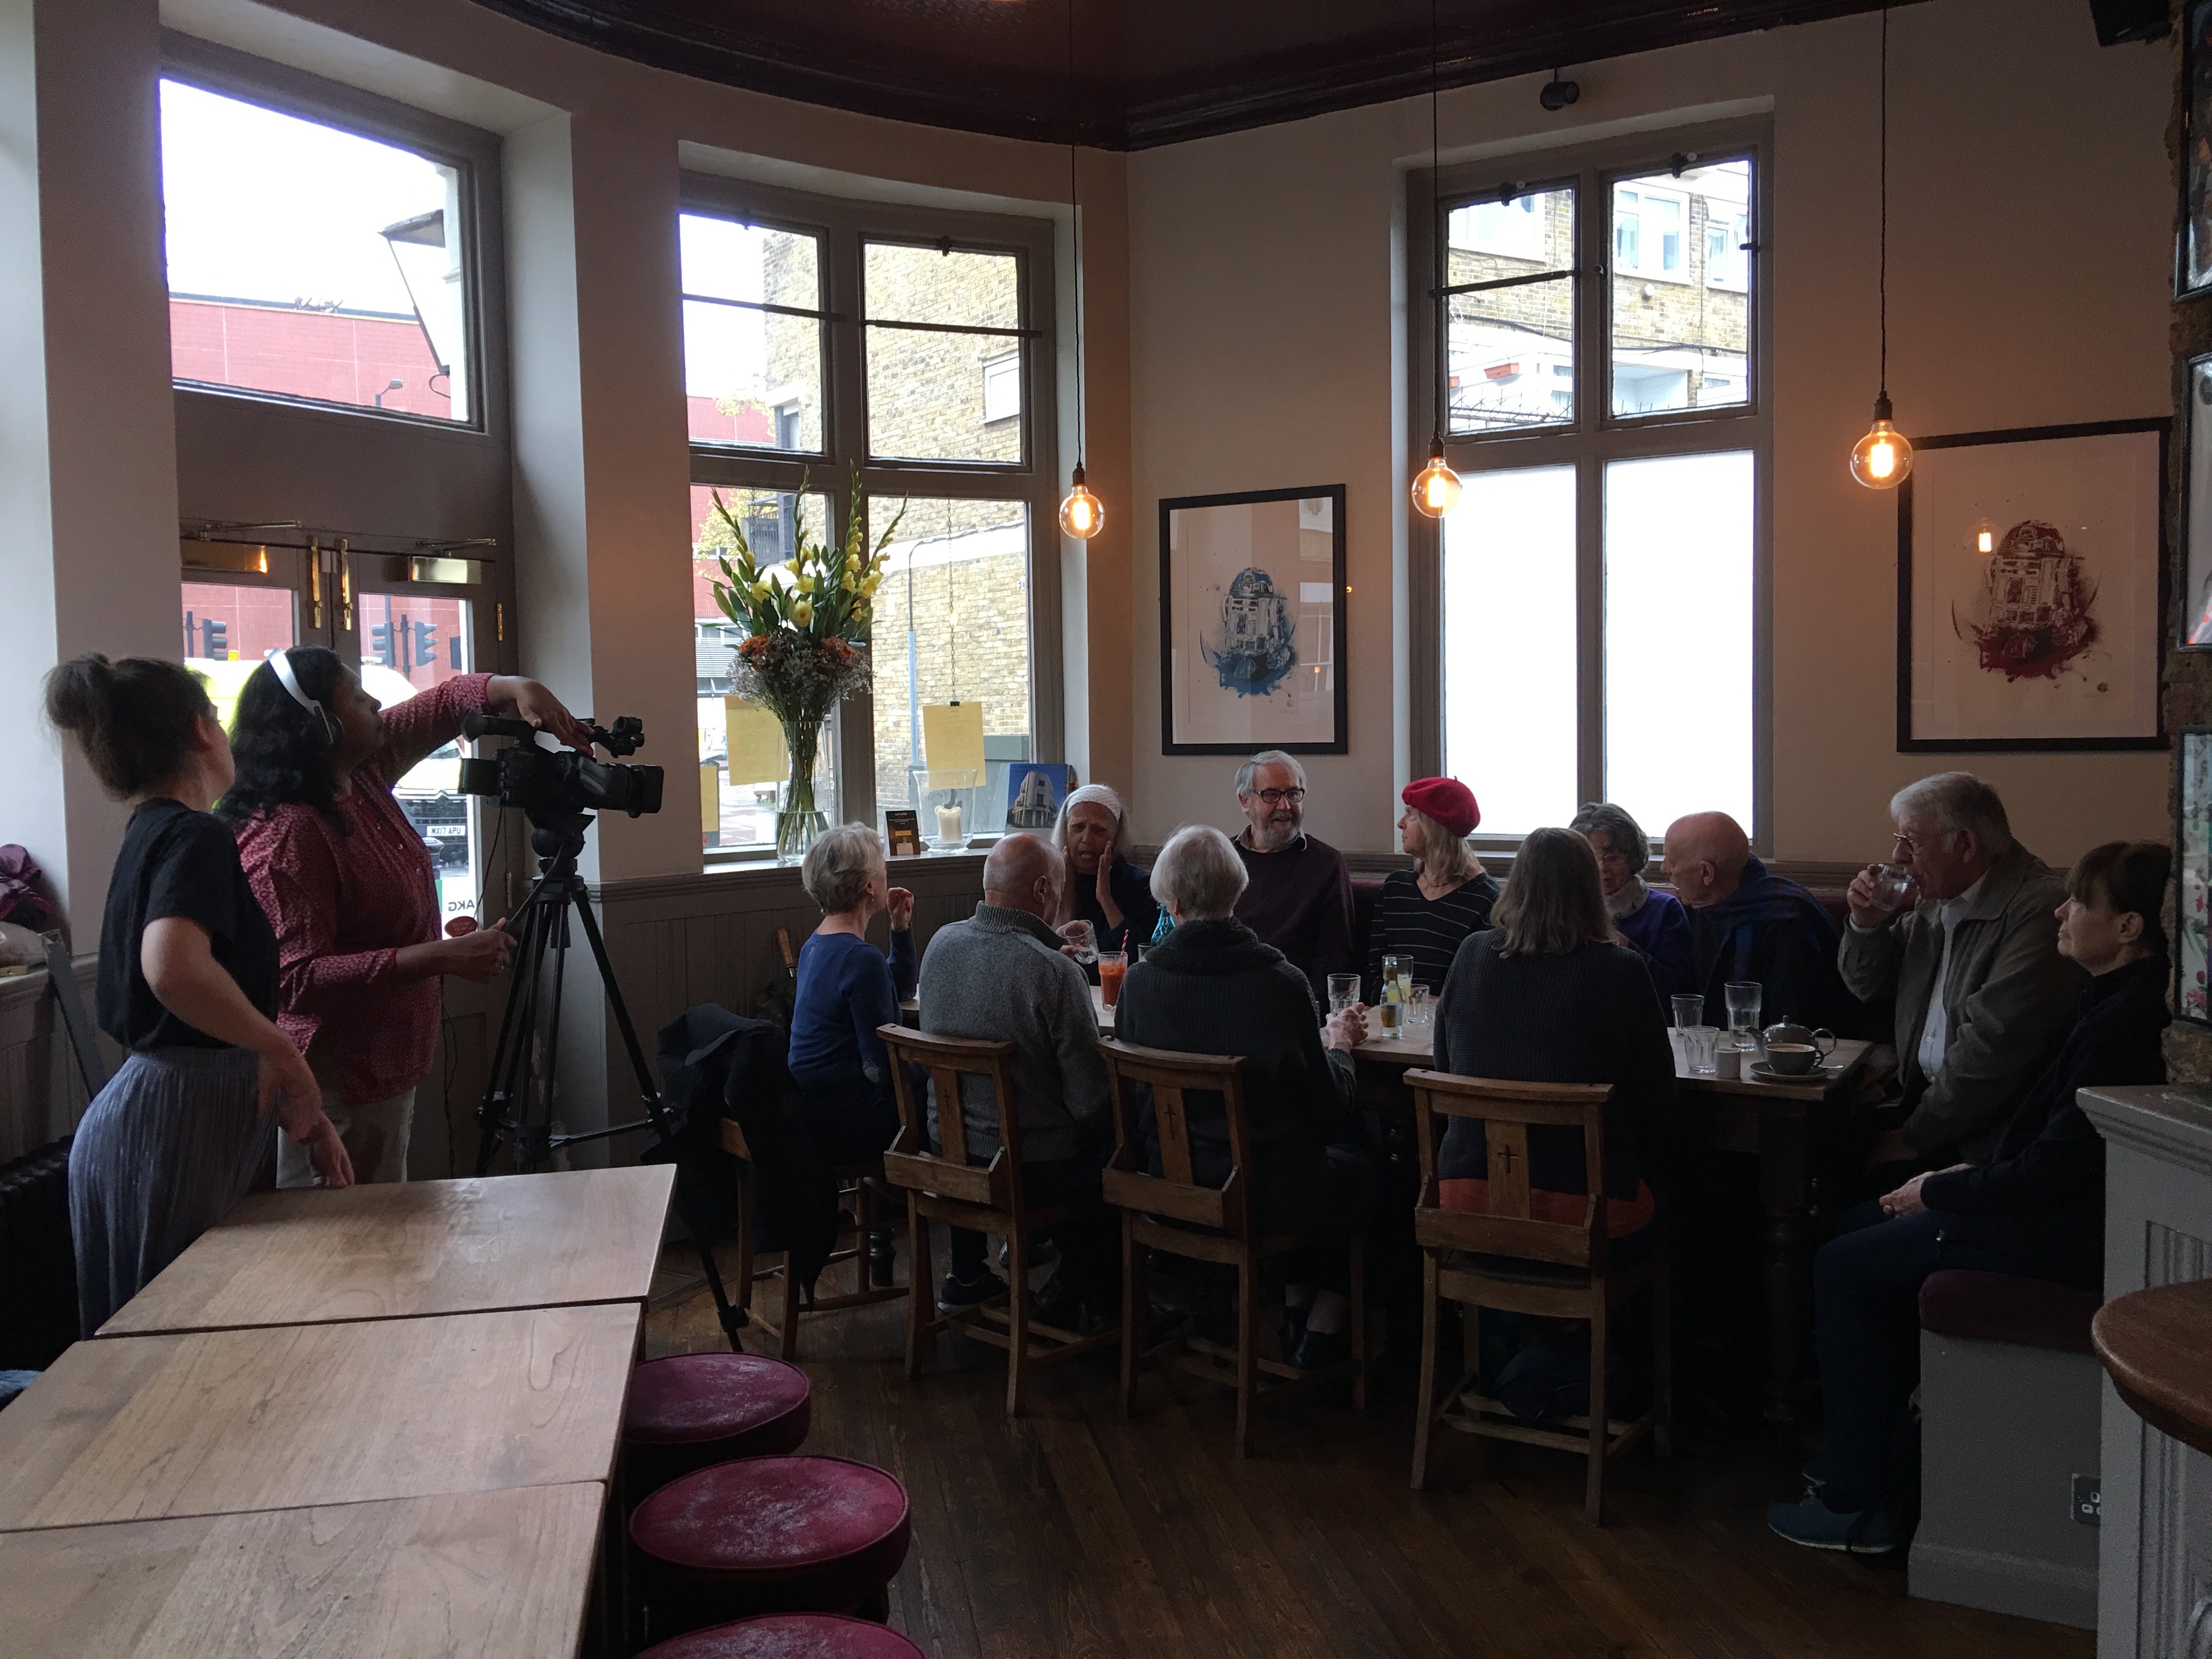 Filming in The Albert Arms